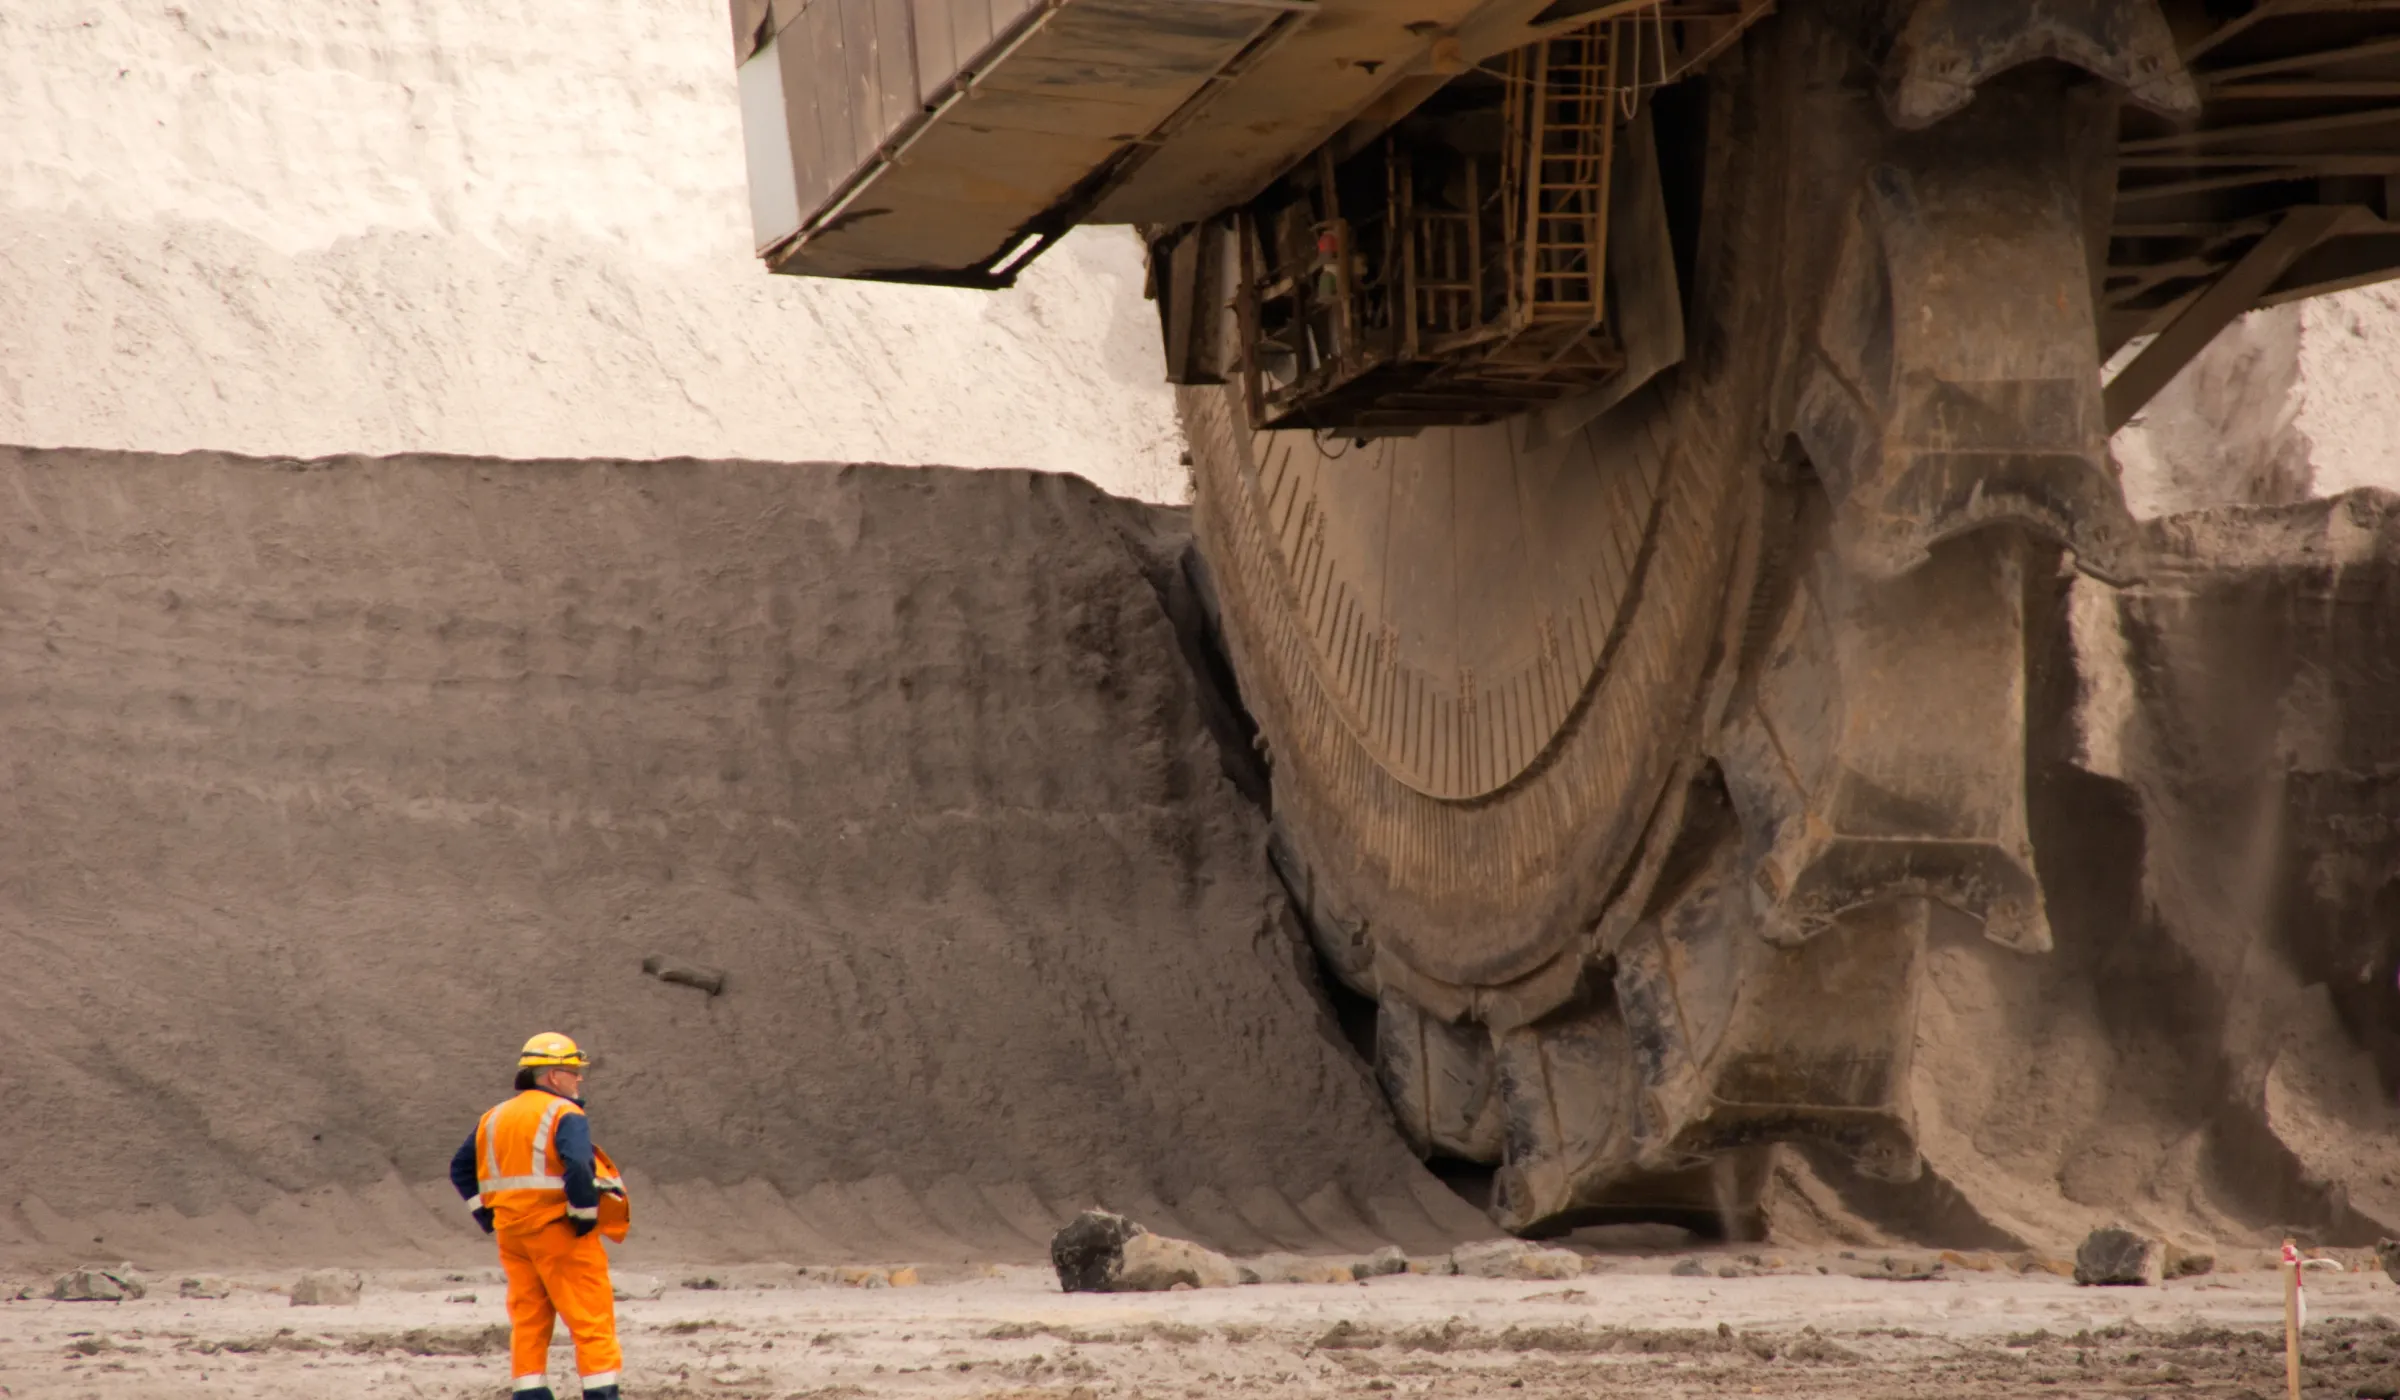 Man standing at the base of a mining vehicle